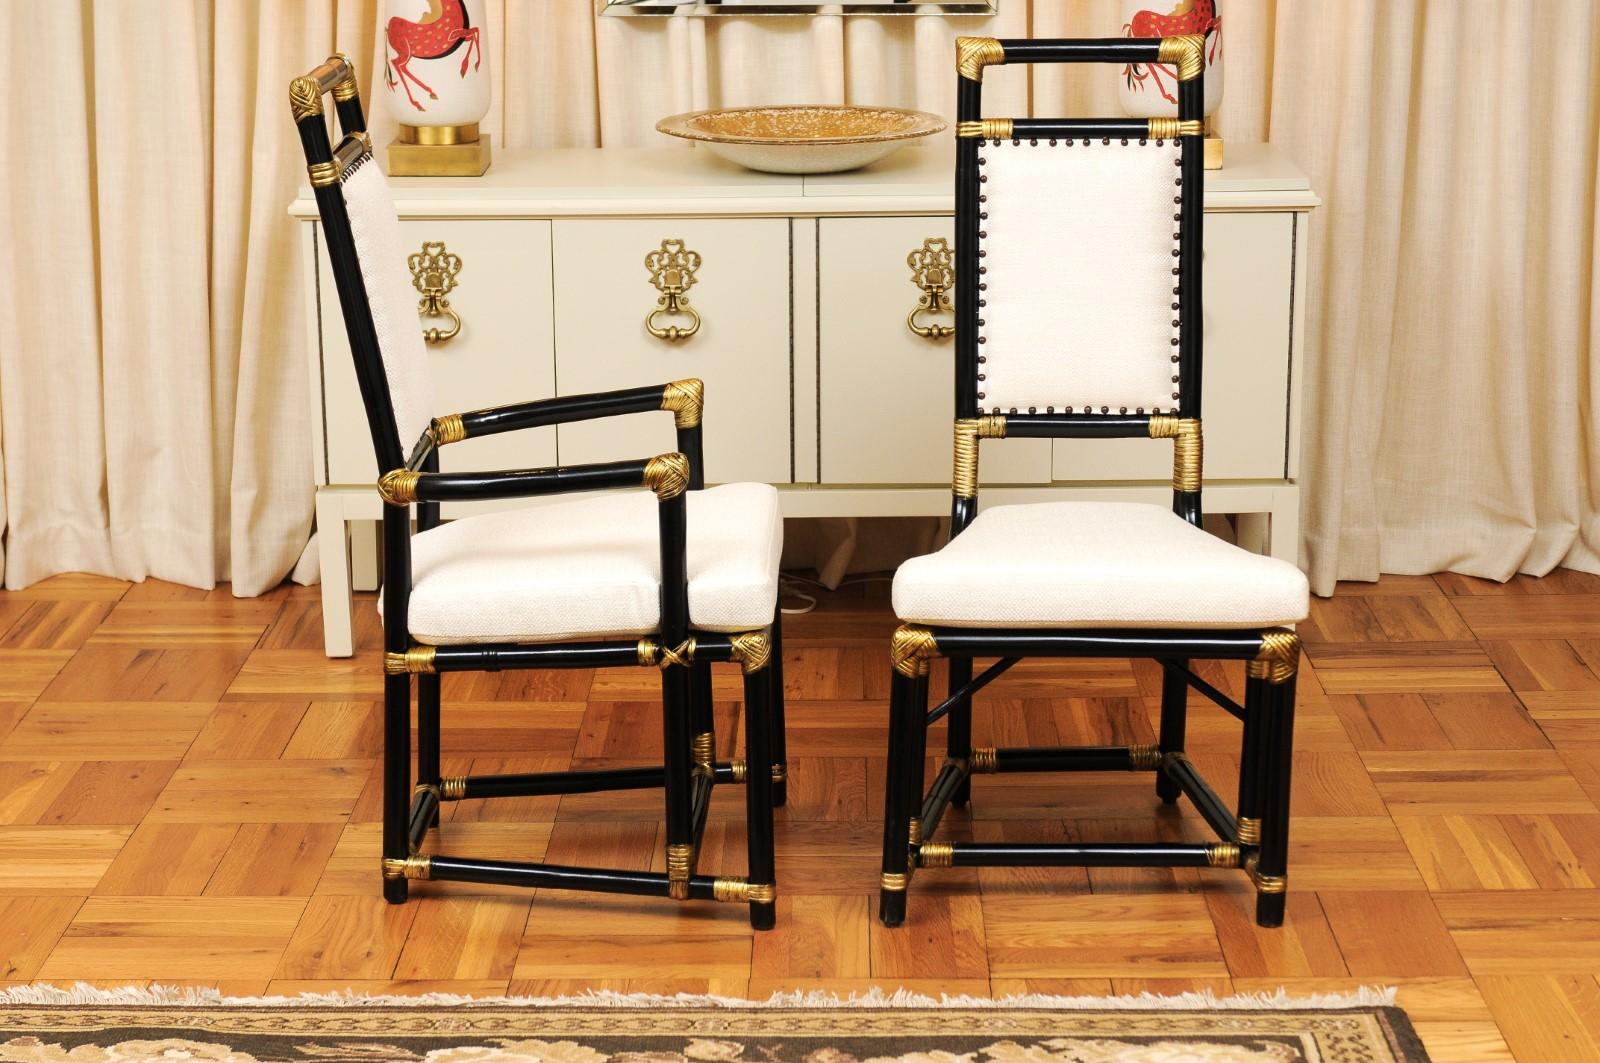 Regal Set of 12 Egyptian Revival Throne Dining Chairs by Henry Olko, circa 1955 In Excellent Condition For Sale In Atlanta, GA